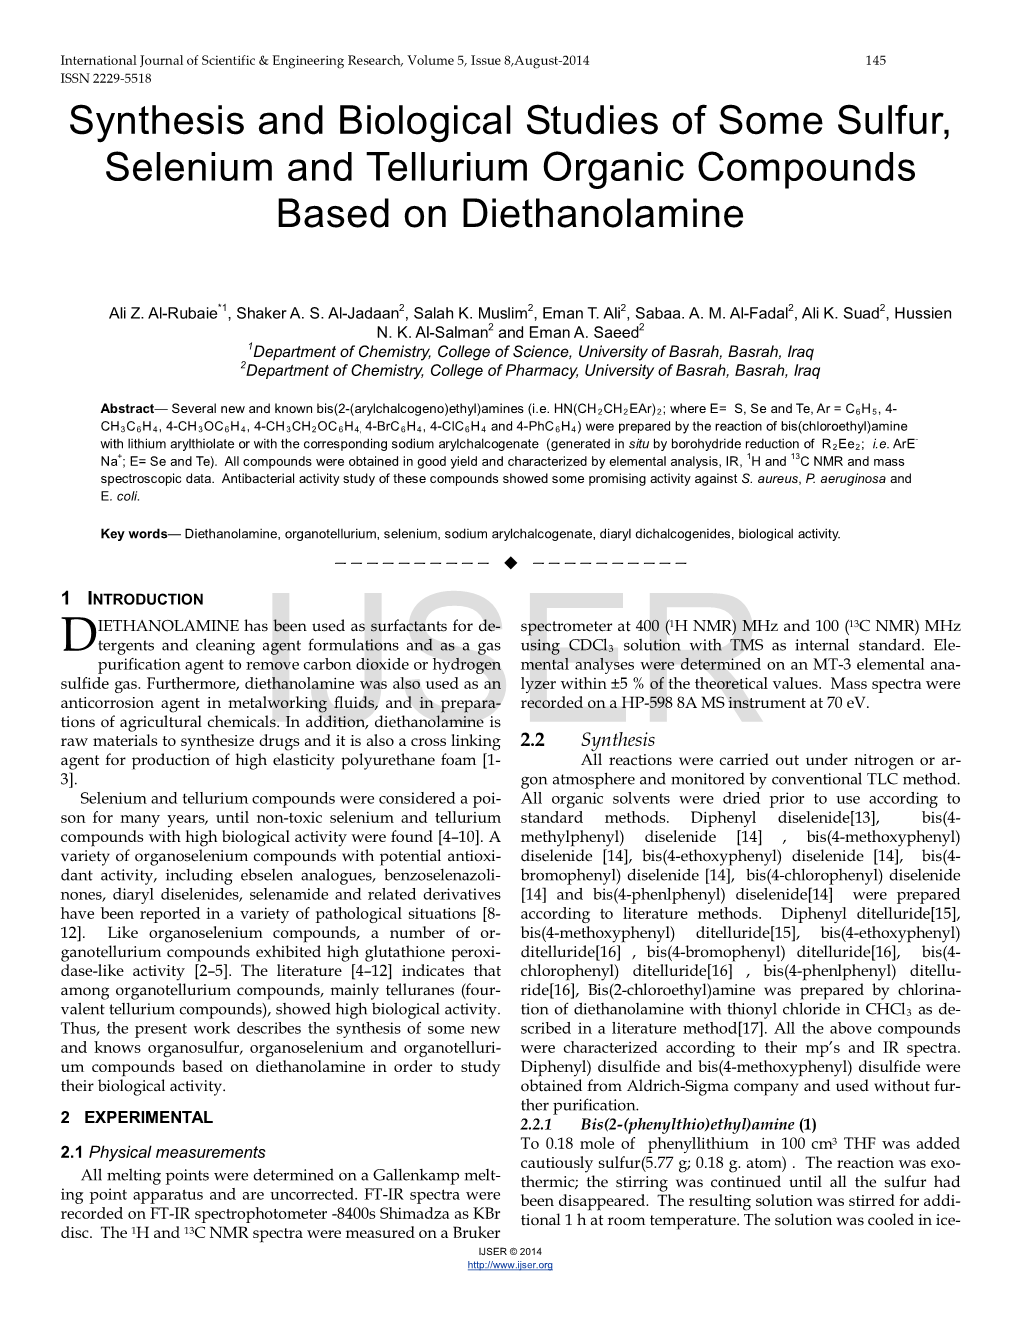 Synthesis and Biological Studies of Some Sulfur, Selenium and Tellurium Organic Compounds Based on Diethanolamine